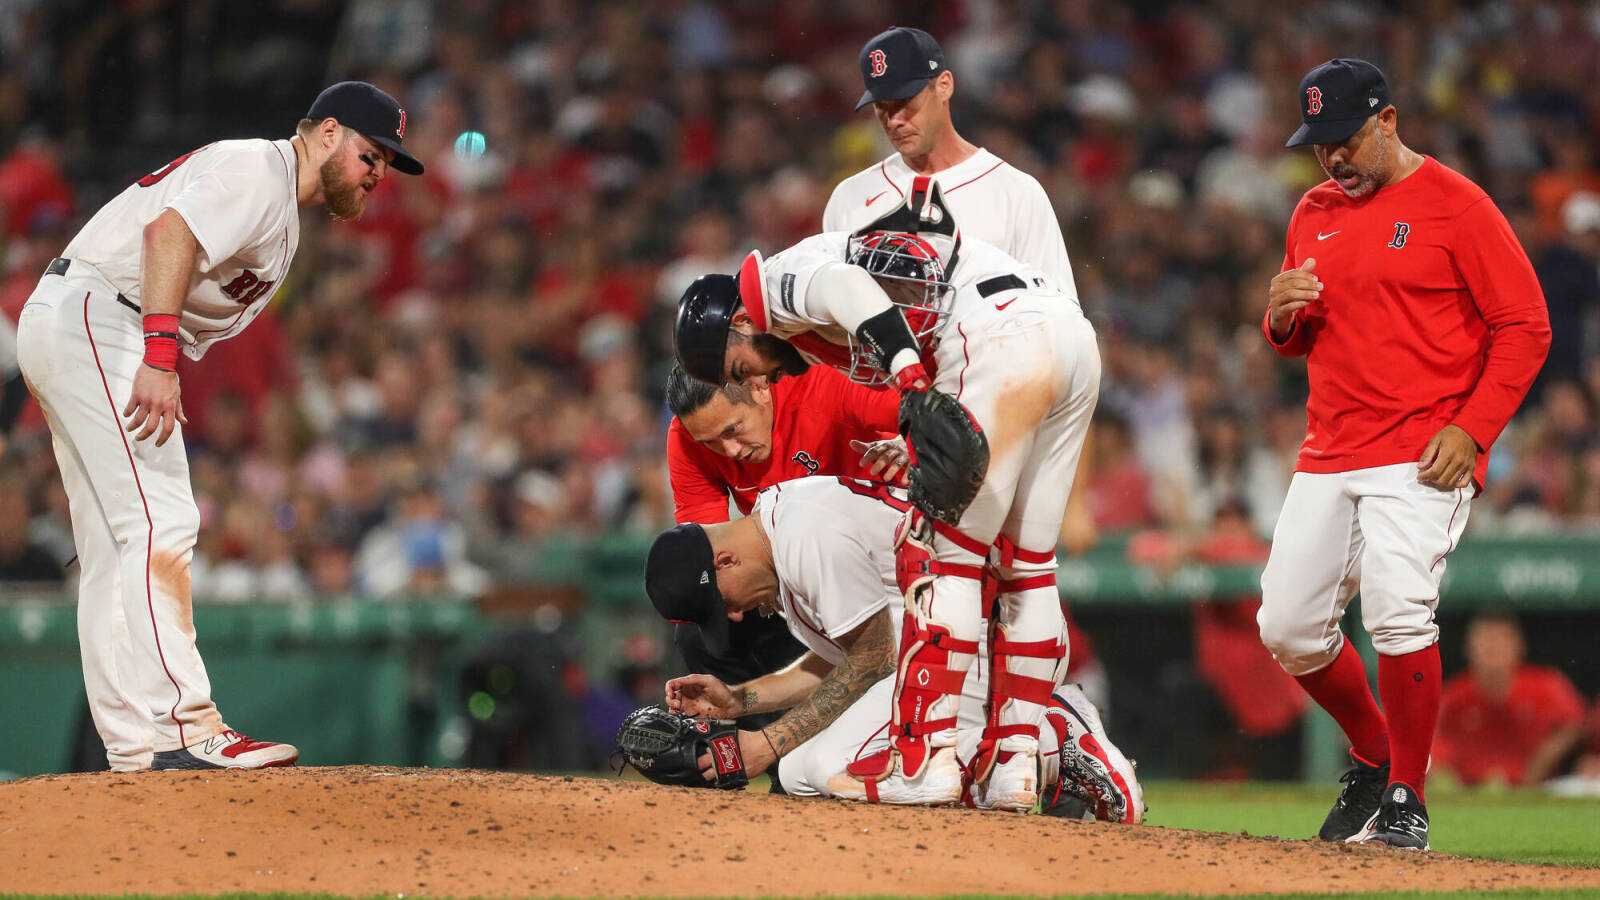 Red Sox pitcher hit by line drive in the face, exits game